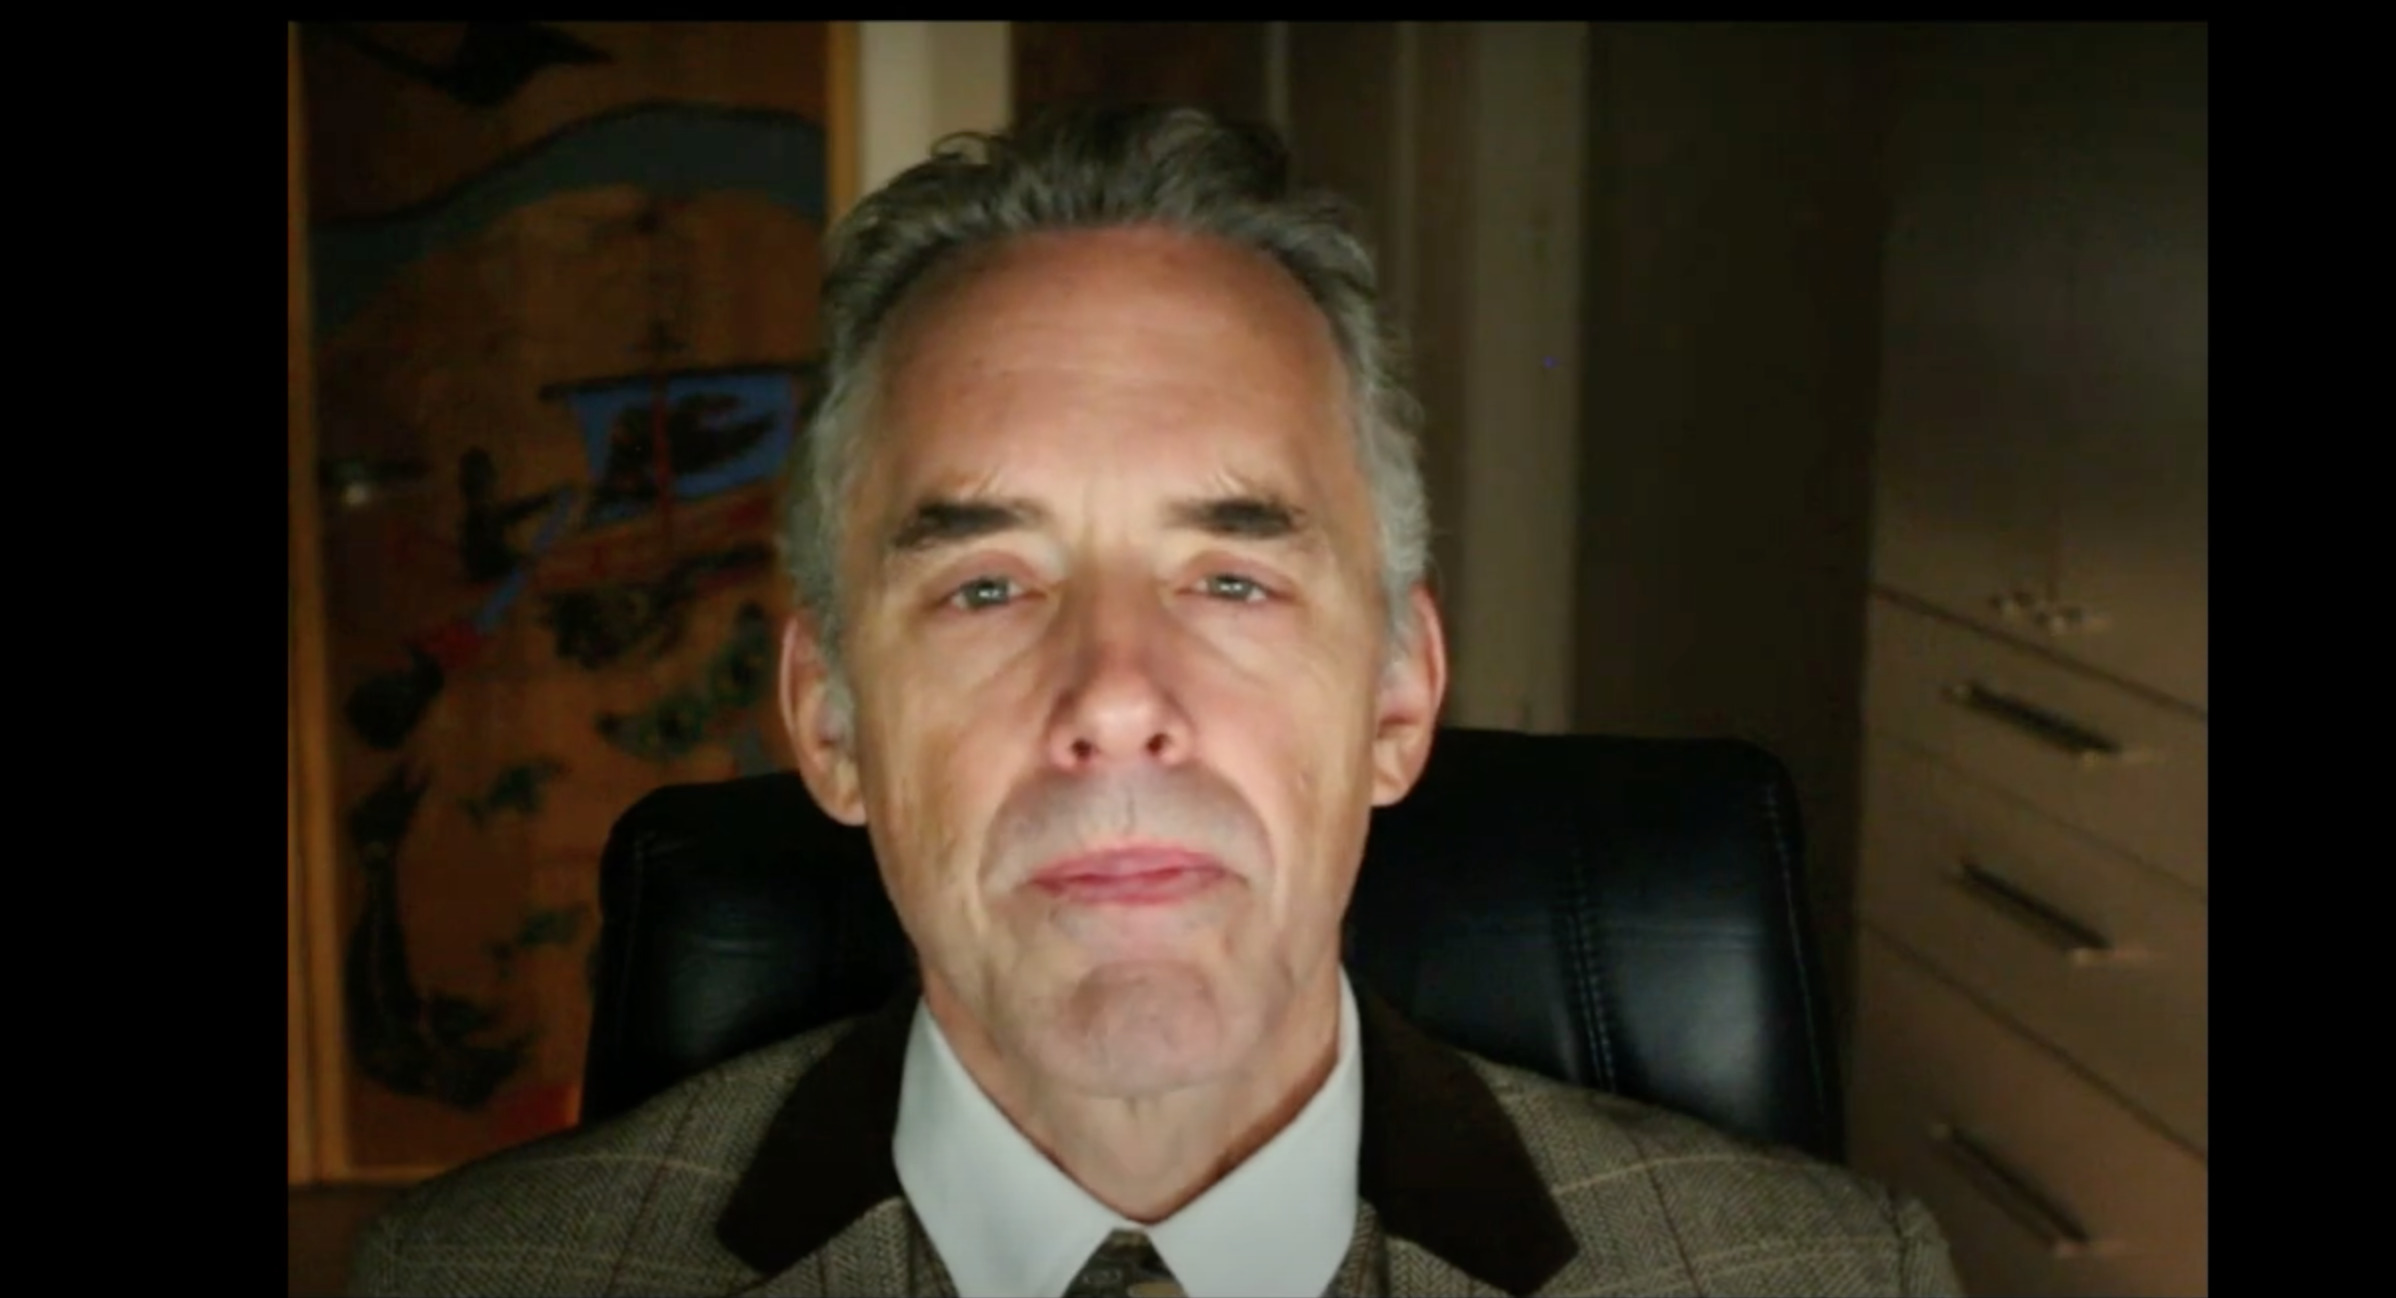 Jordan Peterson returns to illness 'with grace and - Eternity News